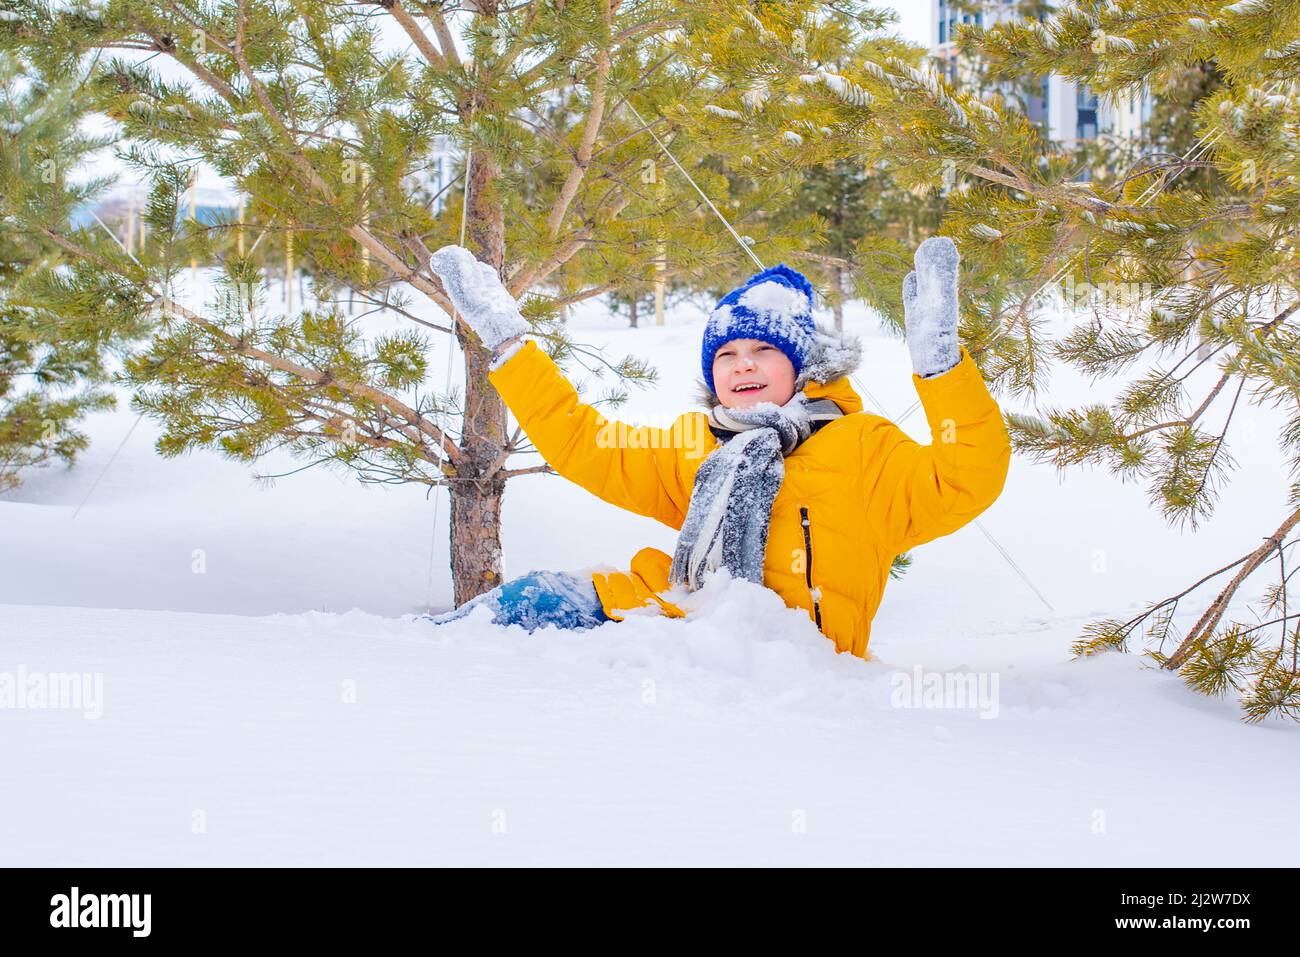 in a bright yellow jacket and a blue hat, a boy in the snow Stock Photo